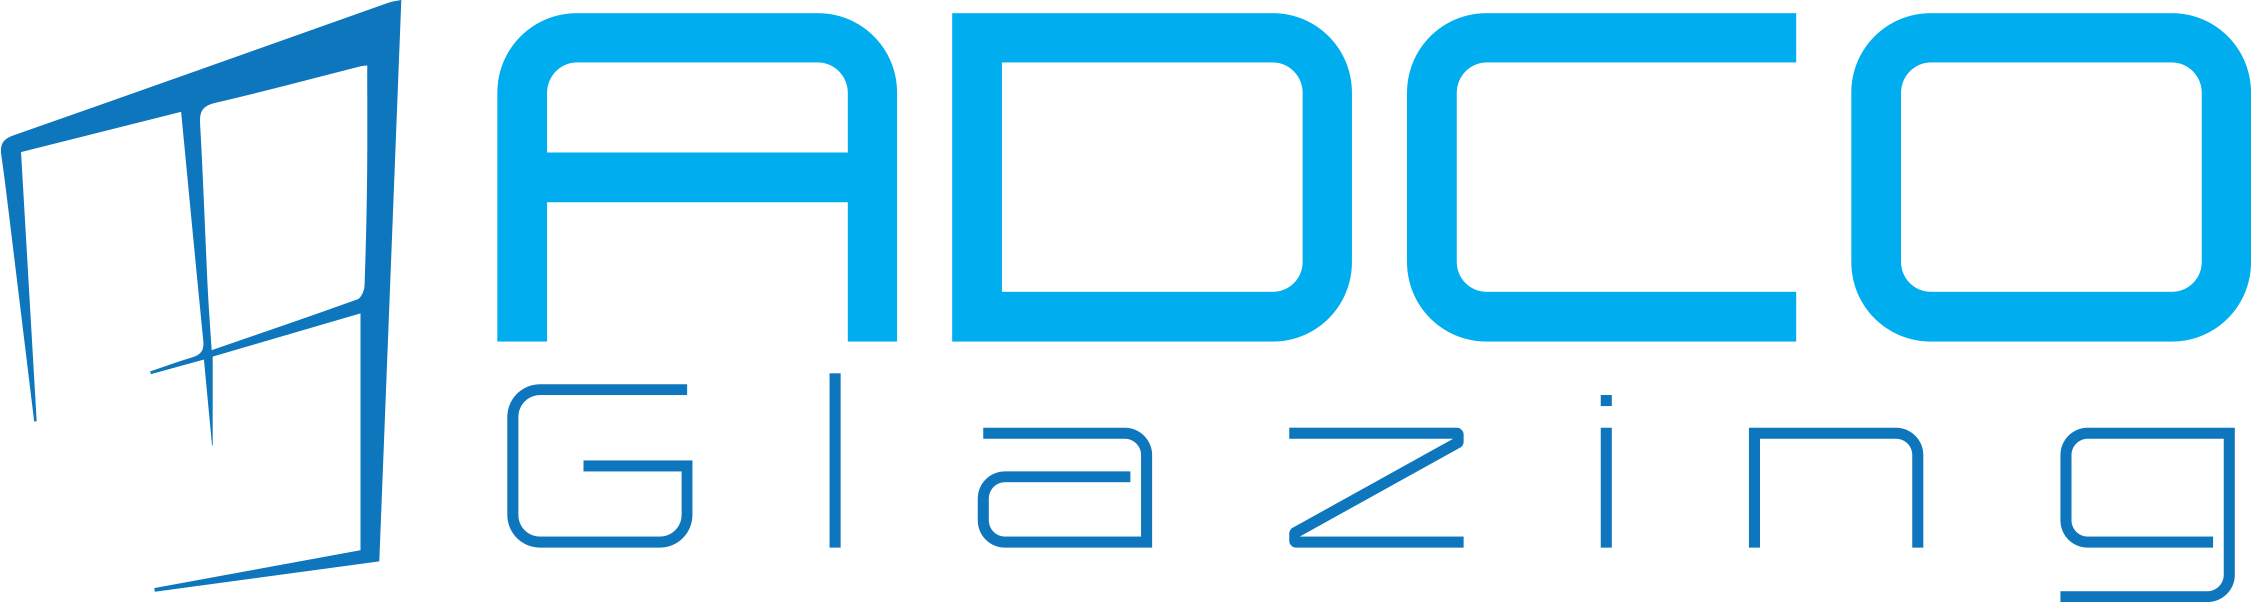 Glaziers Logo - Adco Glazing - Professional Glazing Services, anywhere in the UK